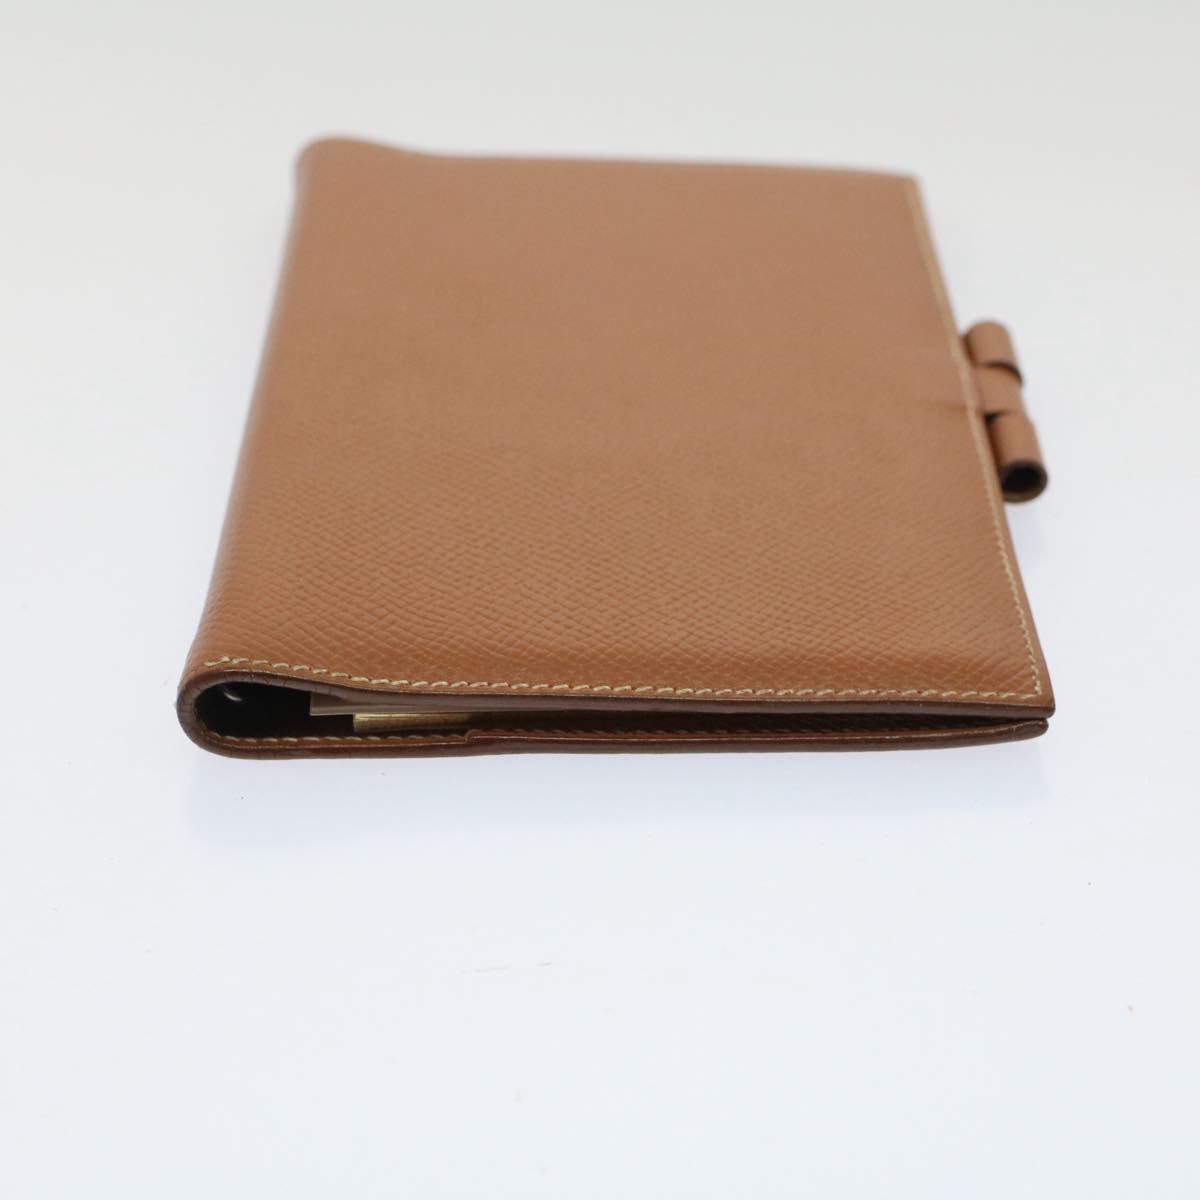 HERMES Ajanda Vijo Day Planner Cover Leather Brown Auth ac2153